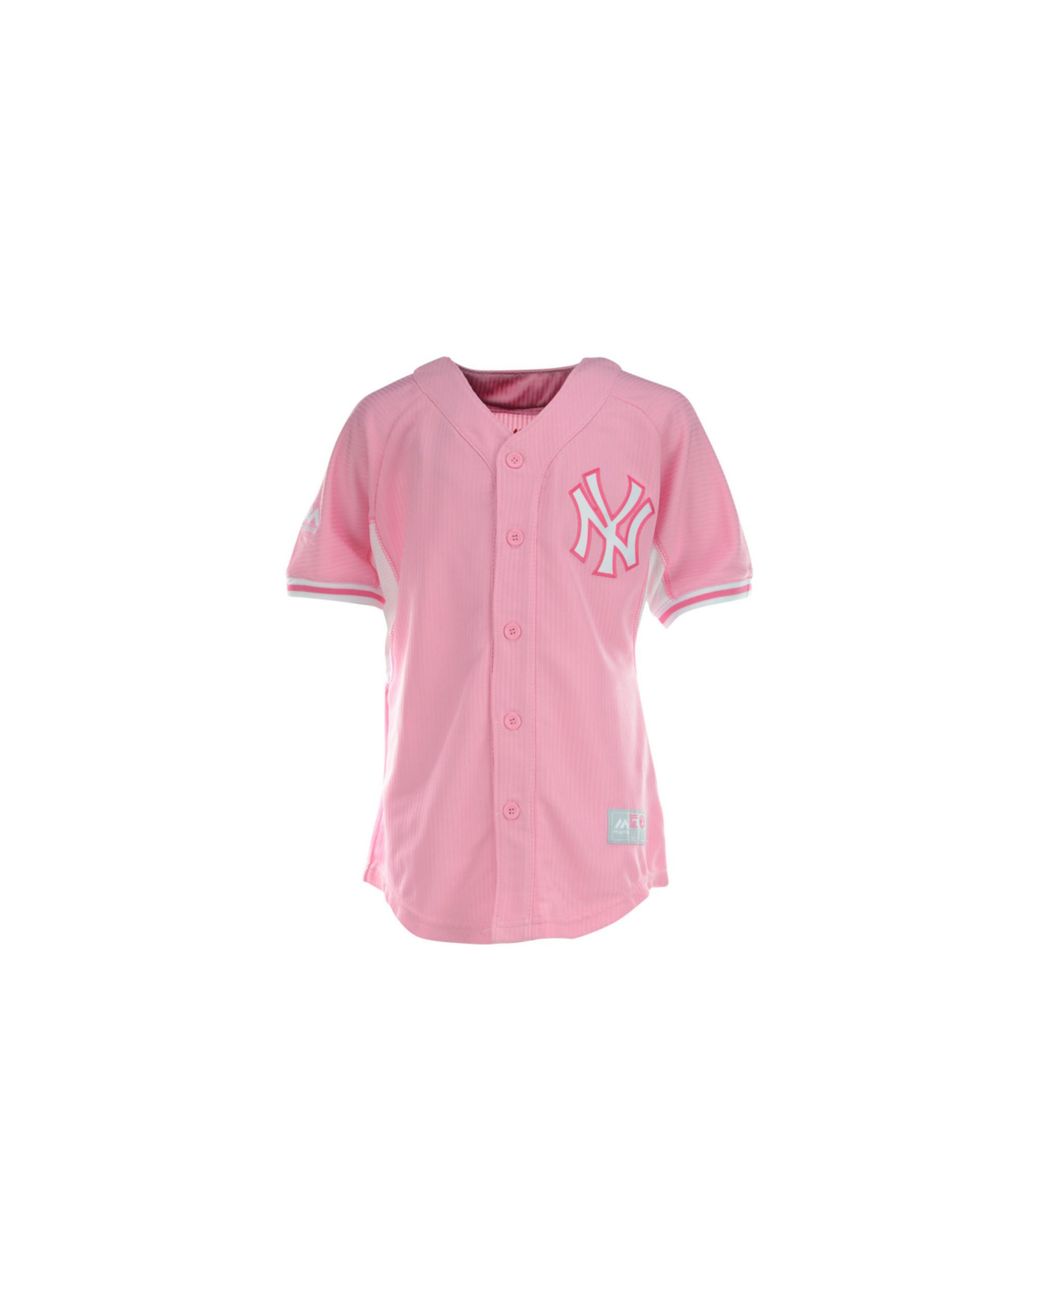 Majestic Girls New York Yankees Jersey in Pink | Lyst